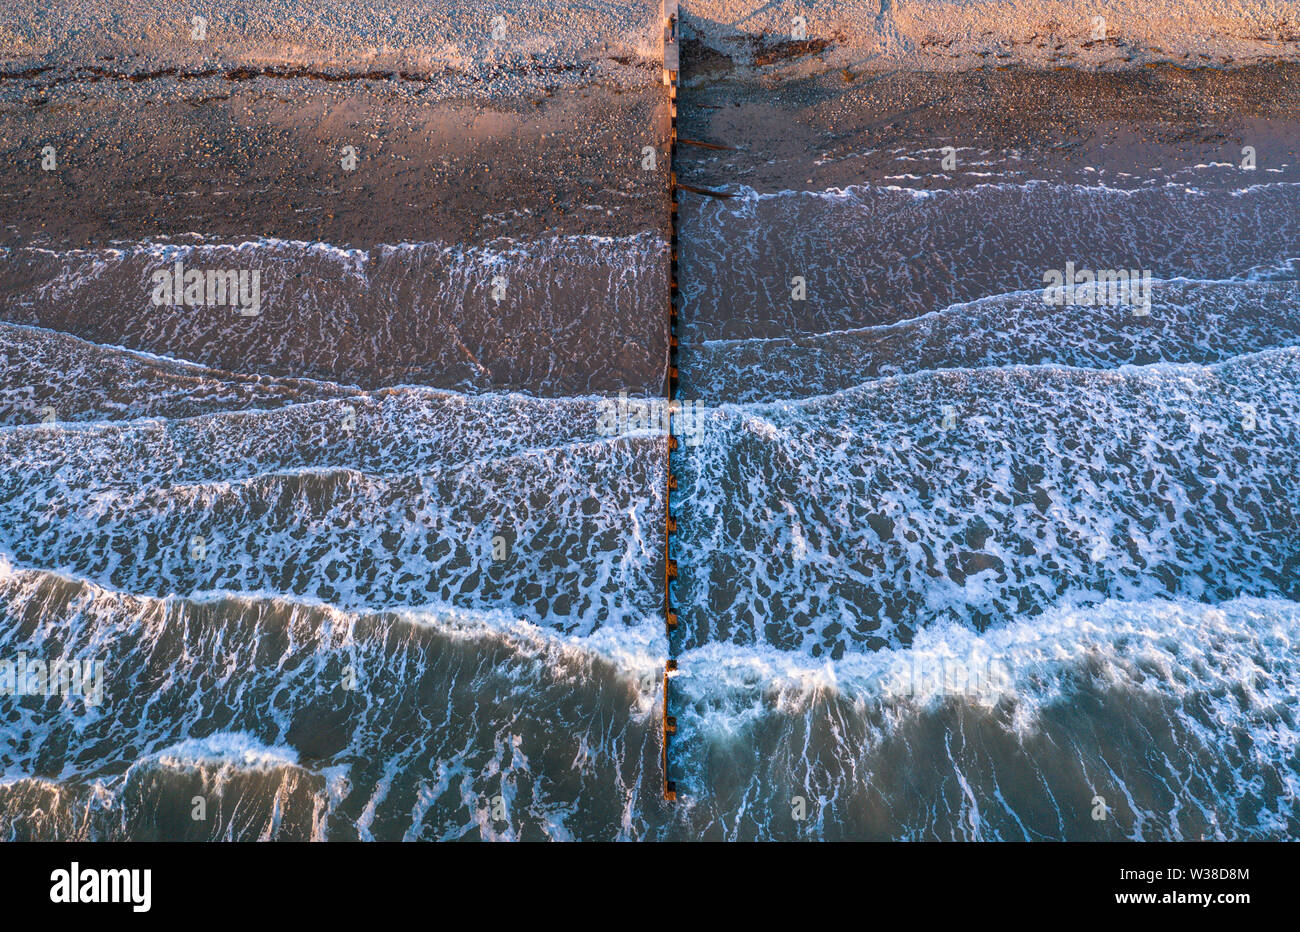 Aerial view over breaking waves on stony shore with wooden breakwater in Barmouth, North Wales, UK Stock Photo